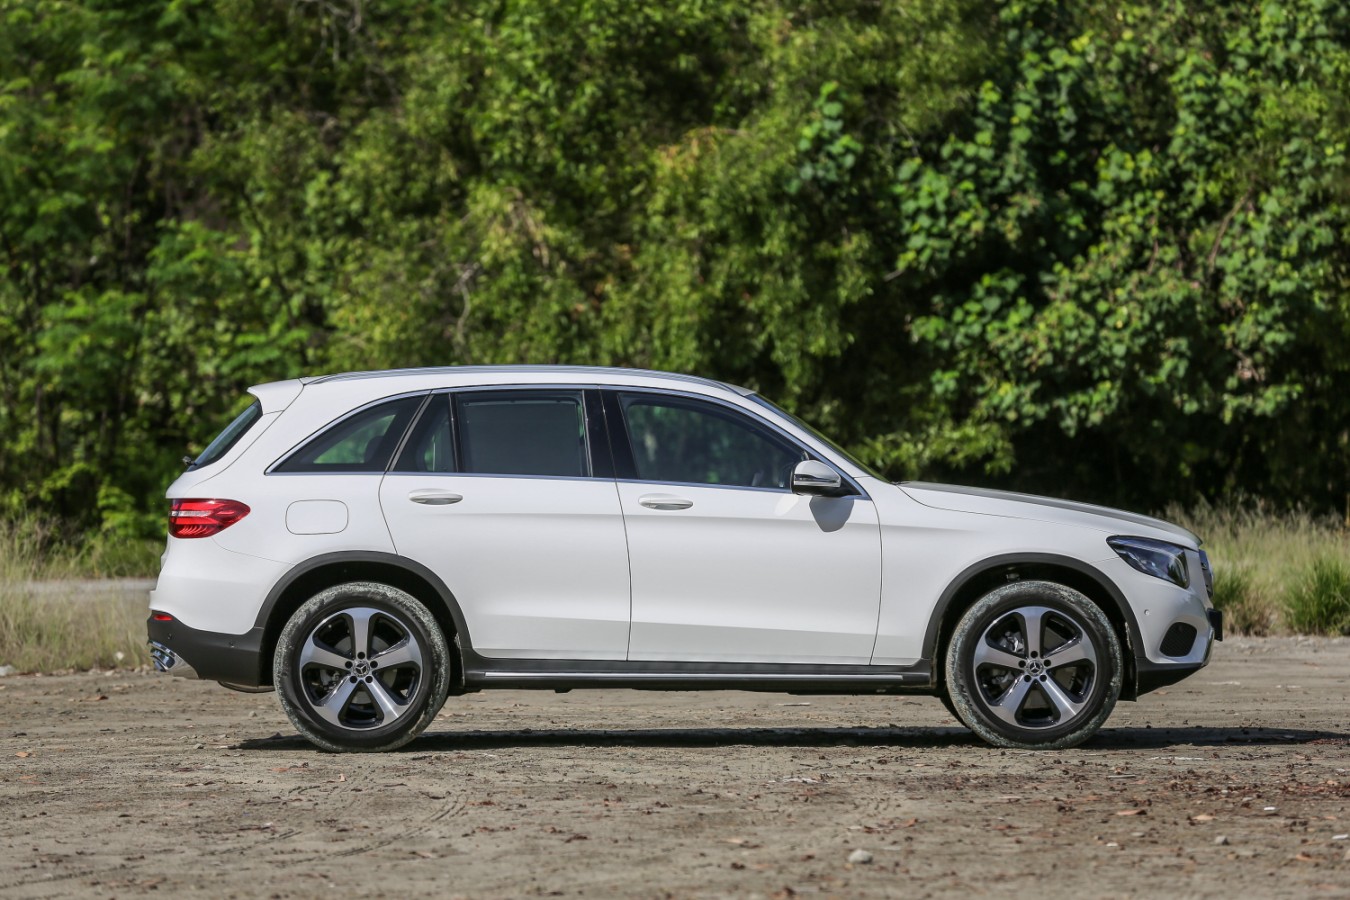 Motoring-Malaysia: Mercedes-Benz Malaysia Launches The GLC 200 - The ...